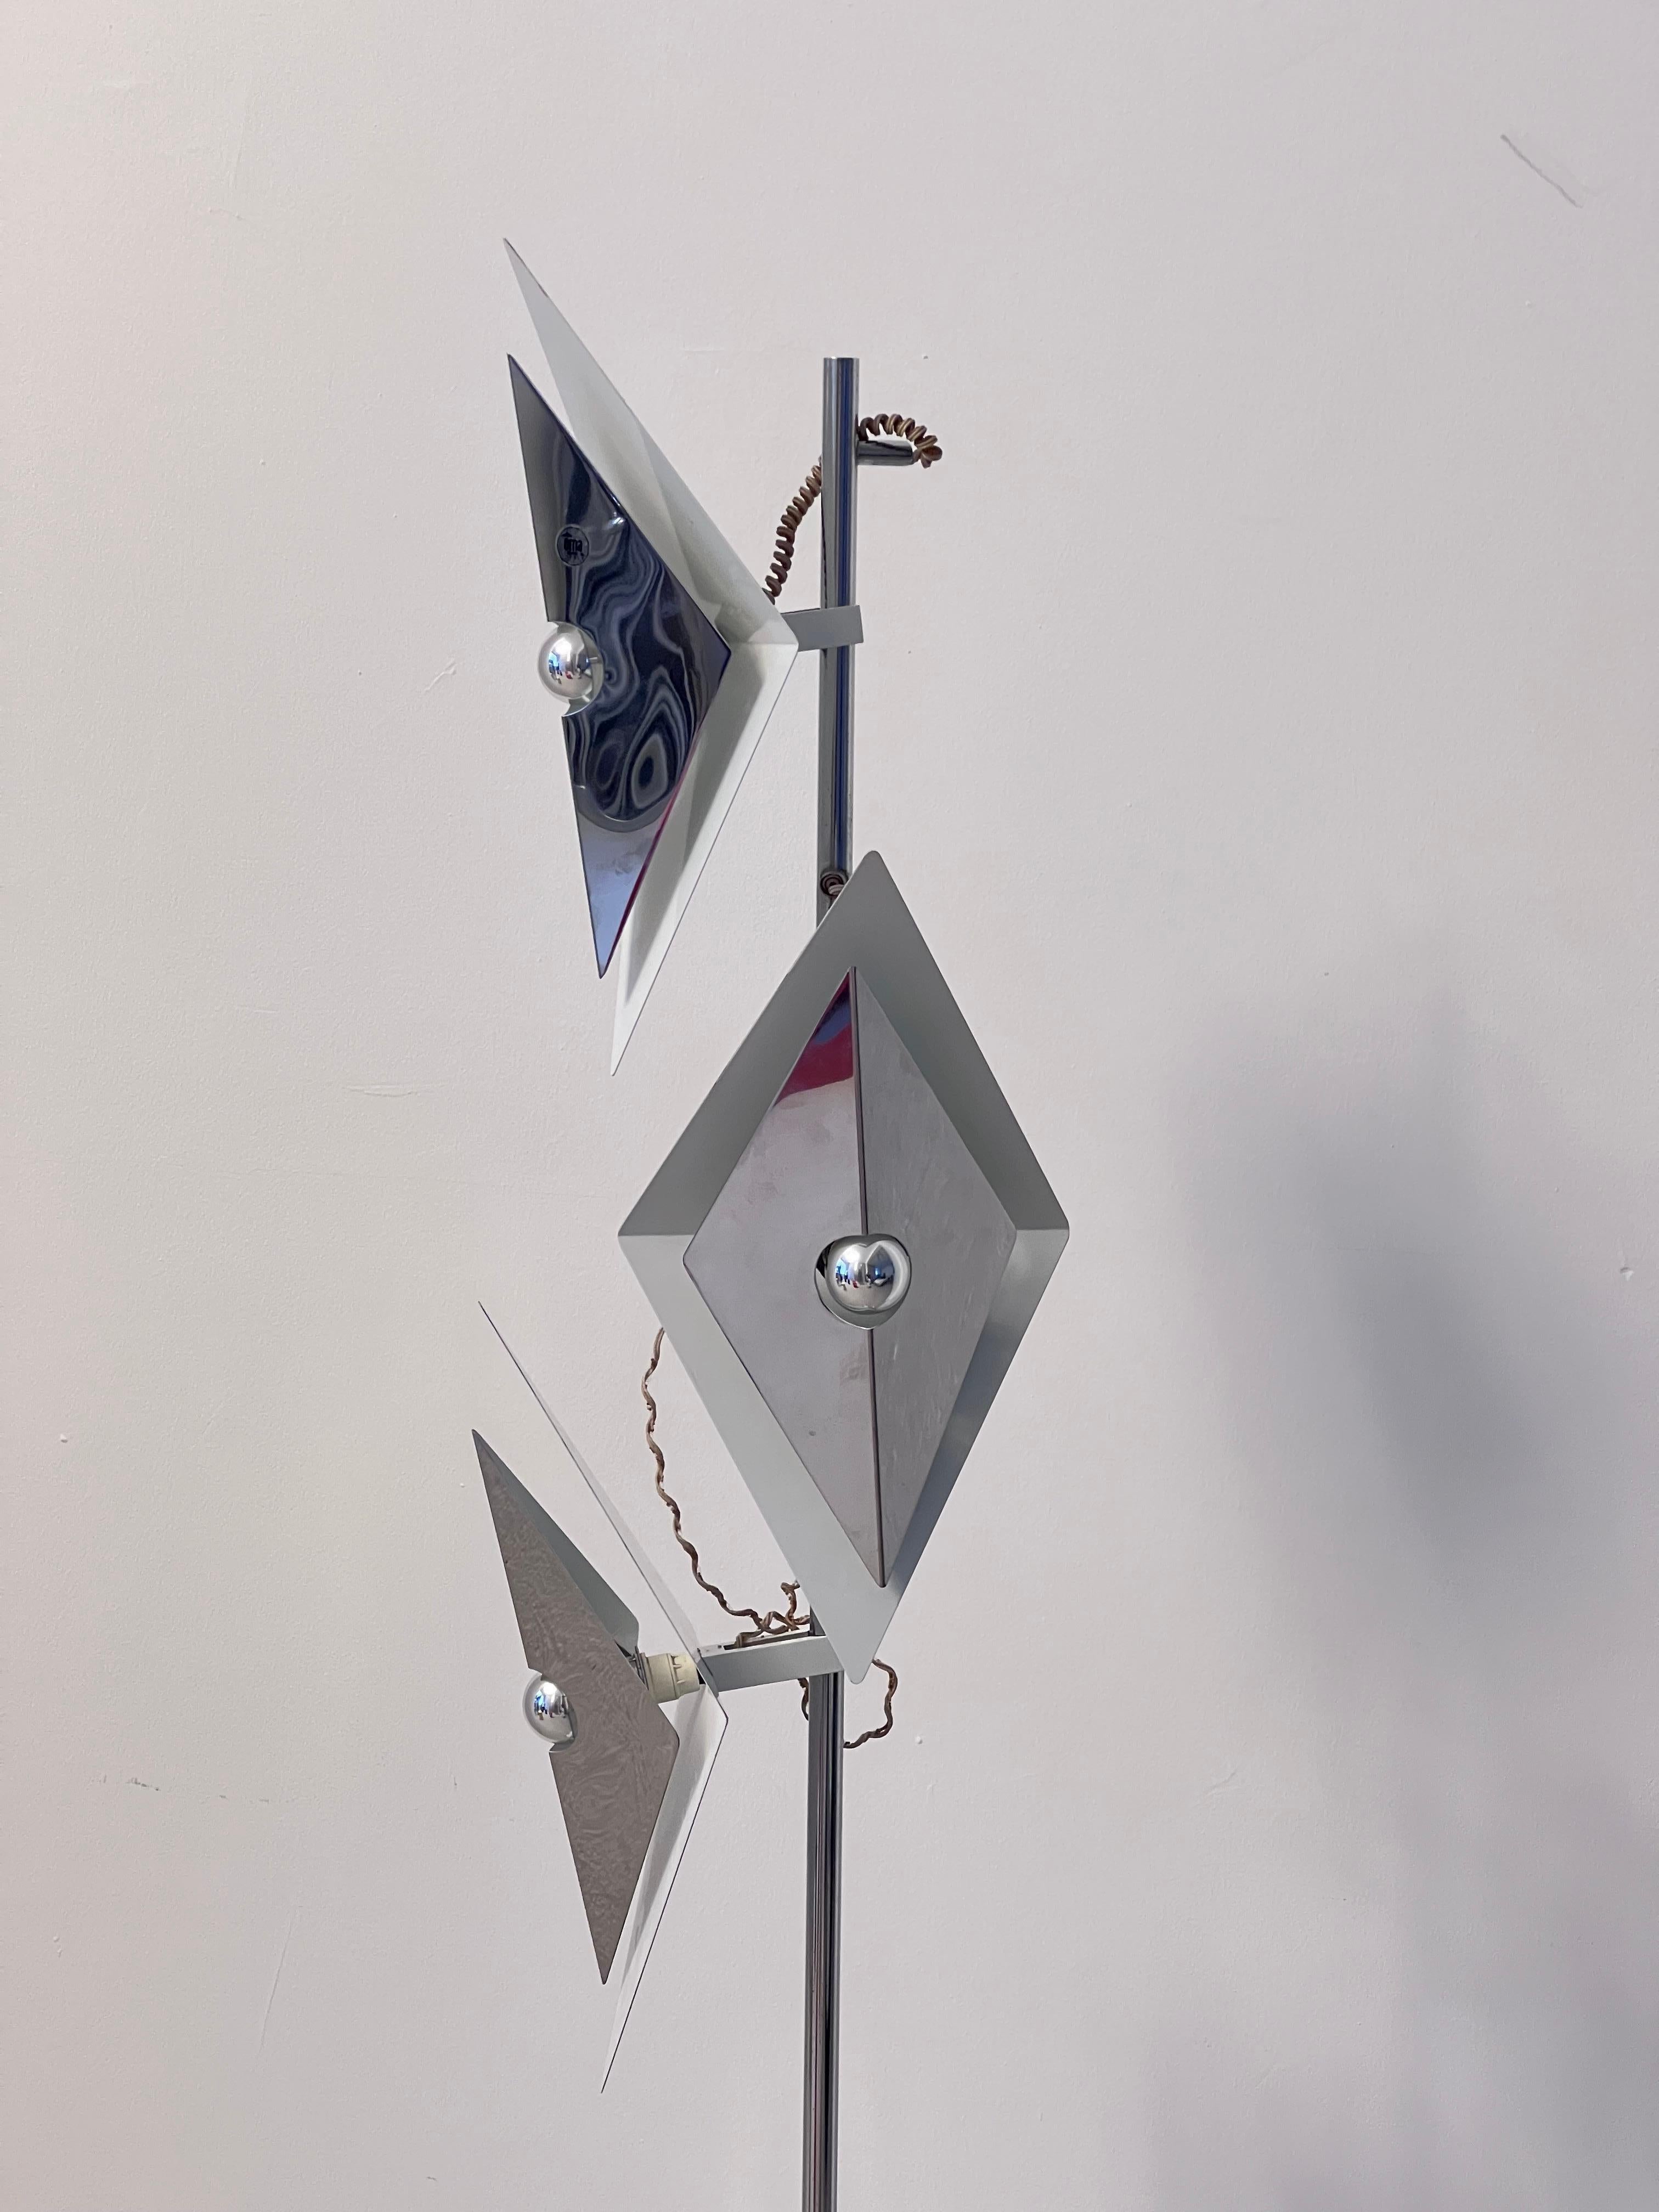 Mid-Century Modern Lamp - Chromed Floor Lamp - Gio Ponti Style Lamp

Offered for sale is a seldom-seen and extremely attractive floor lamp in chromed and white-lacquered metal. Manufactured by O.M.A. Italia, whose label is still crisp and clearly